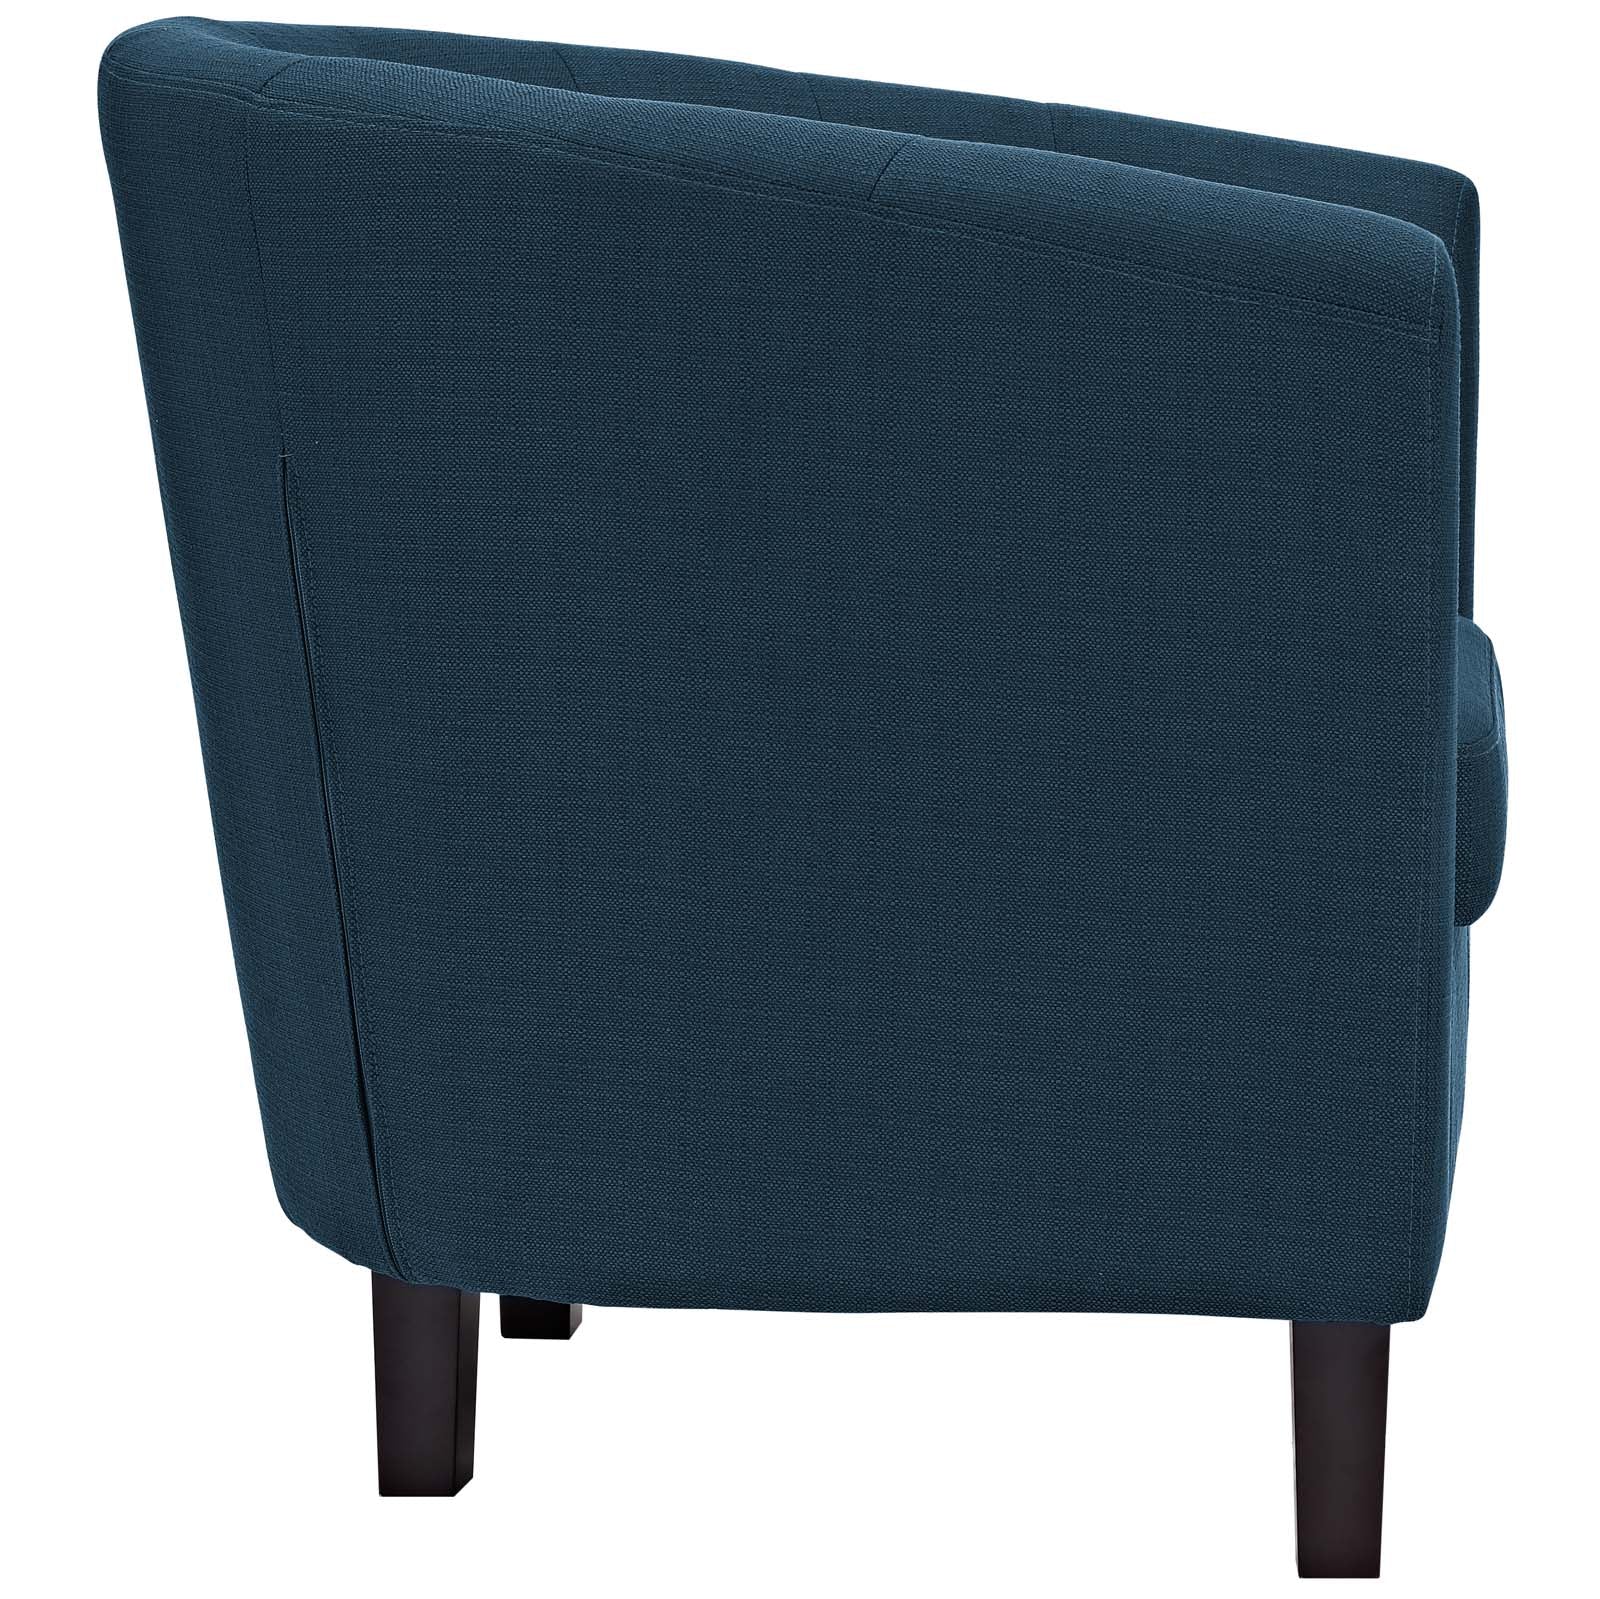 Modway Living Room Sets - Prospect 2 Piece Upholstered Fabric Armchair Set Azure